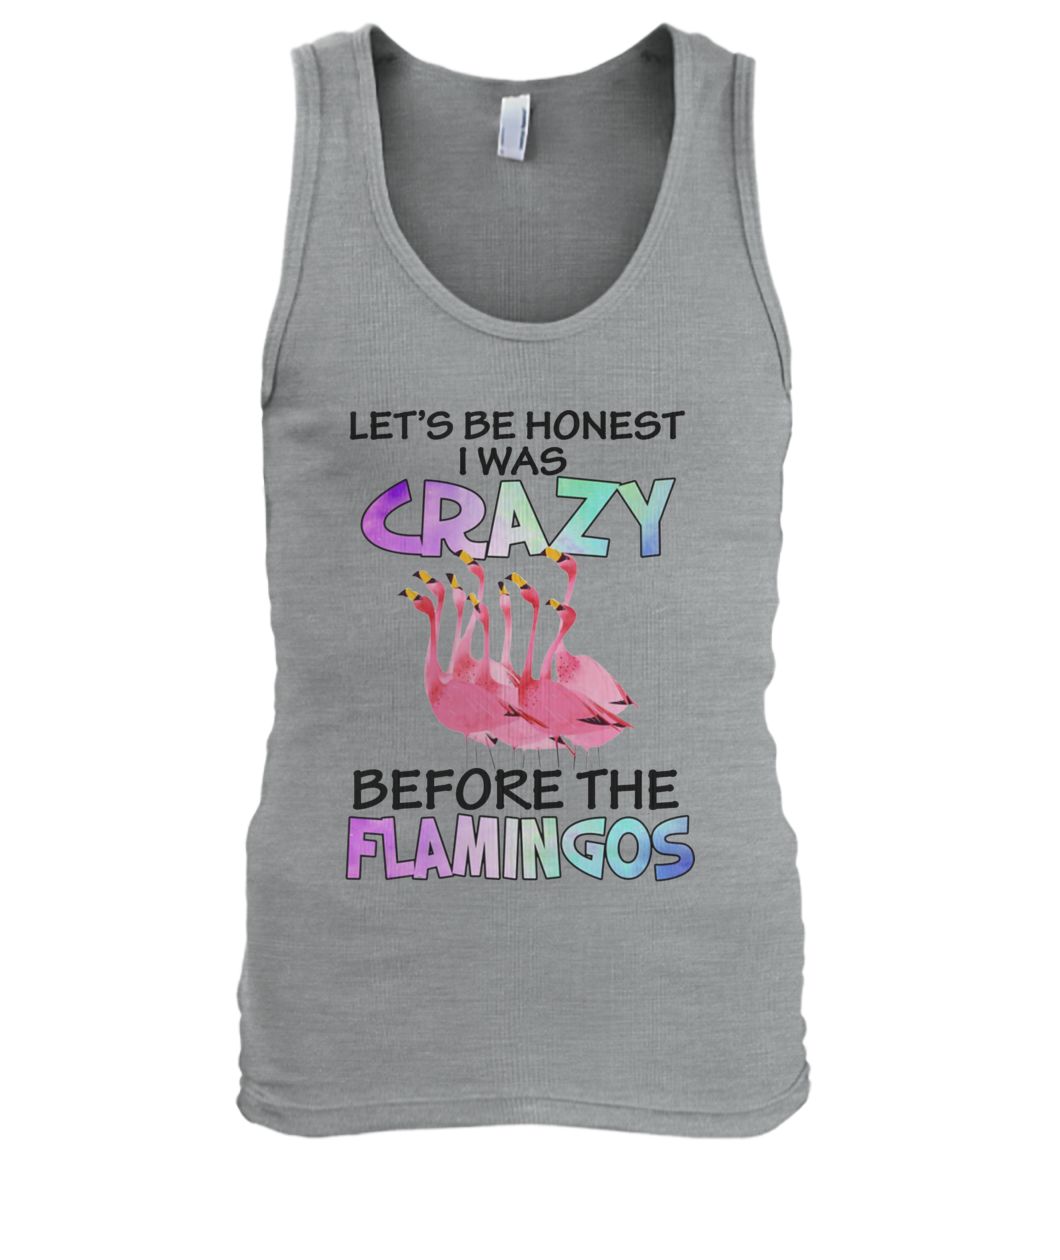 Let's be honest I was crazy before the flamingos men's tank top